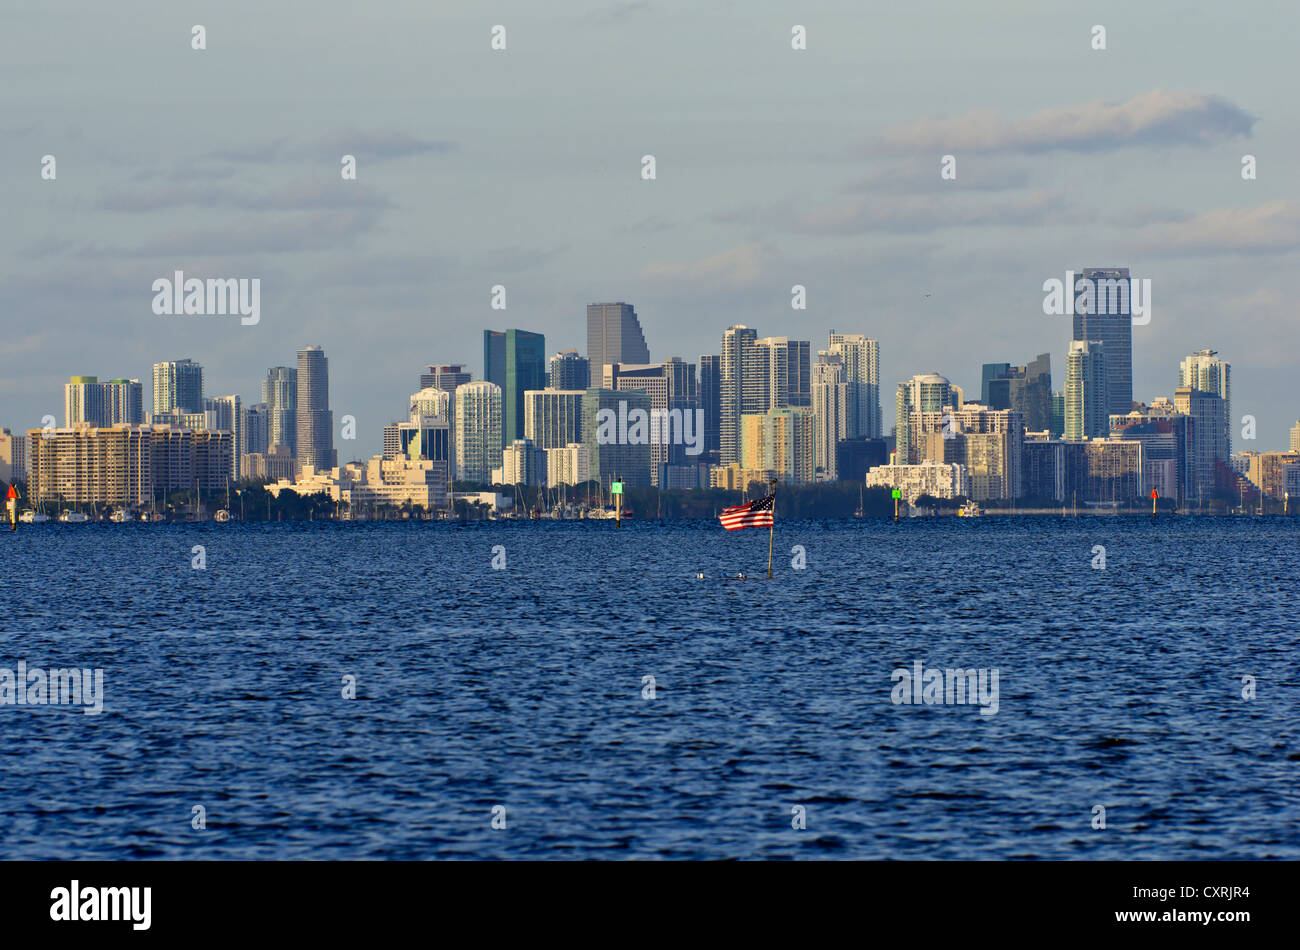 Skyline at the Mount Sinai Medical Center from Morningside Park with motorboat, Miami, Florida, USA Stock Photo